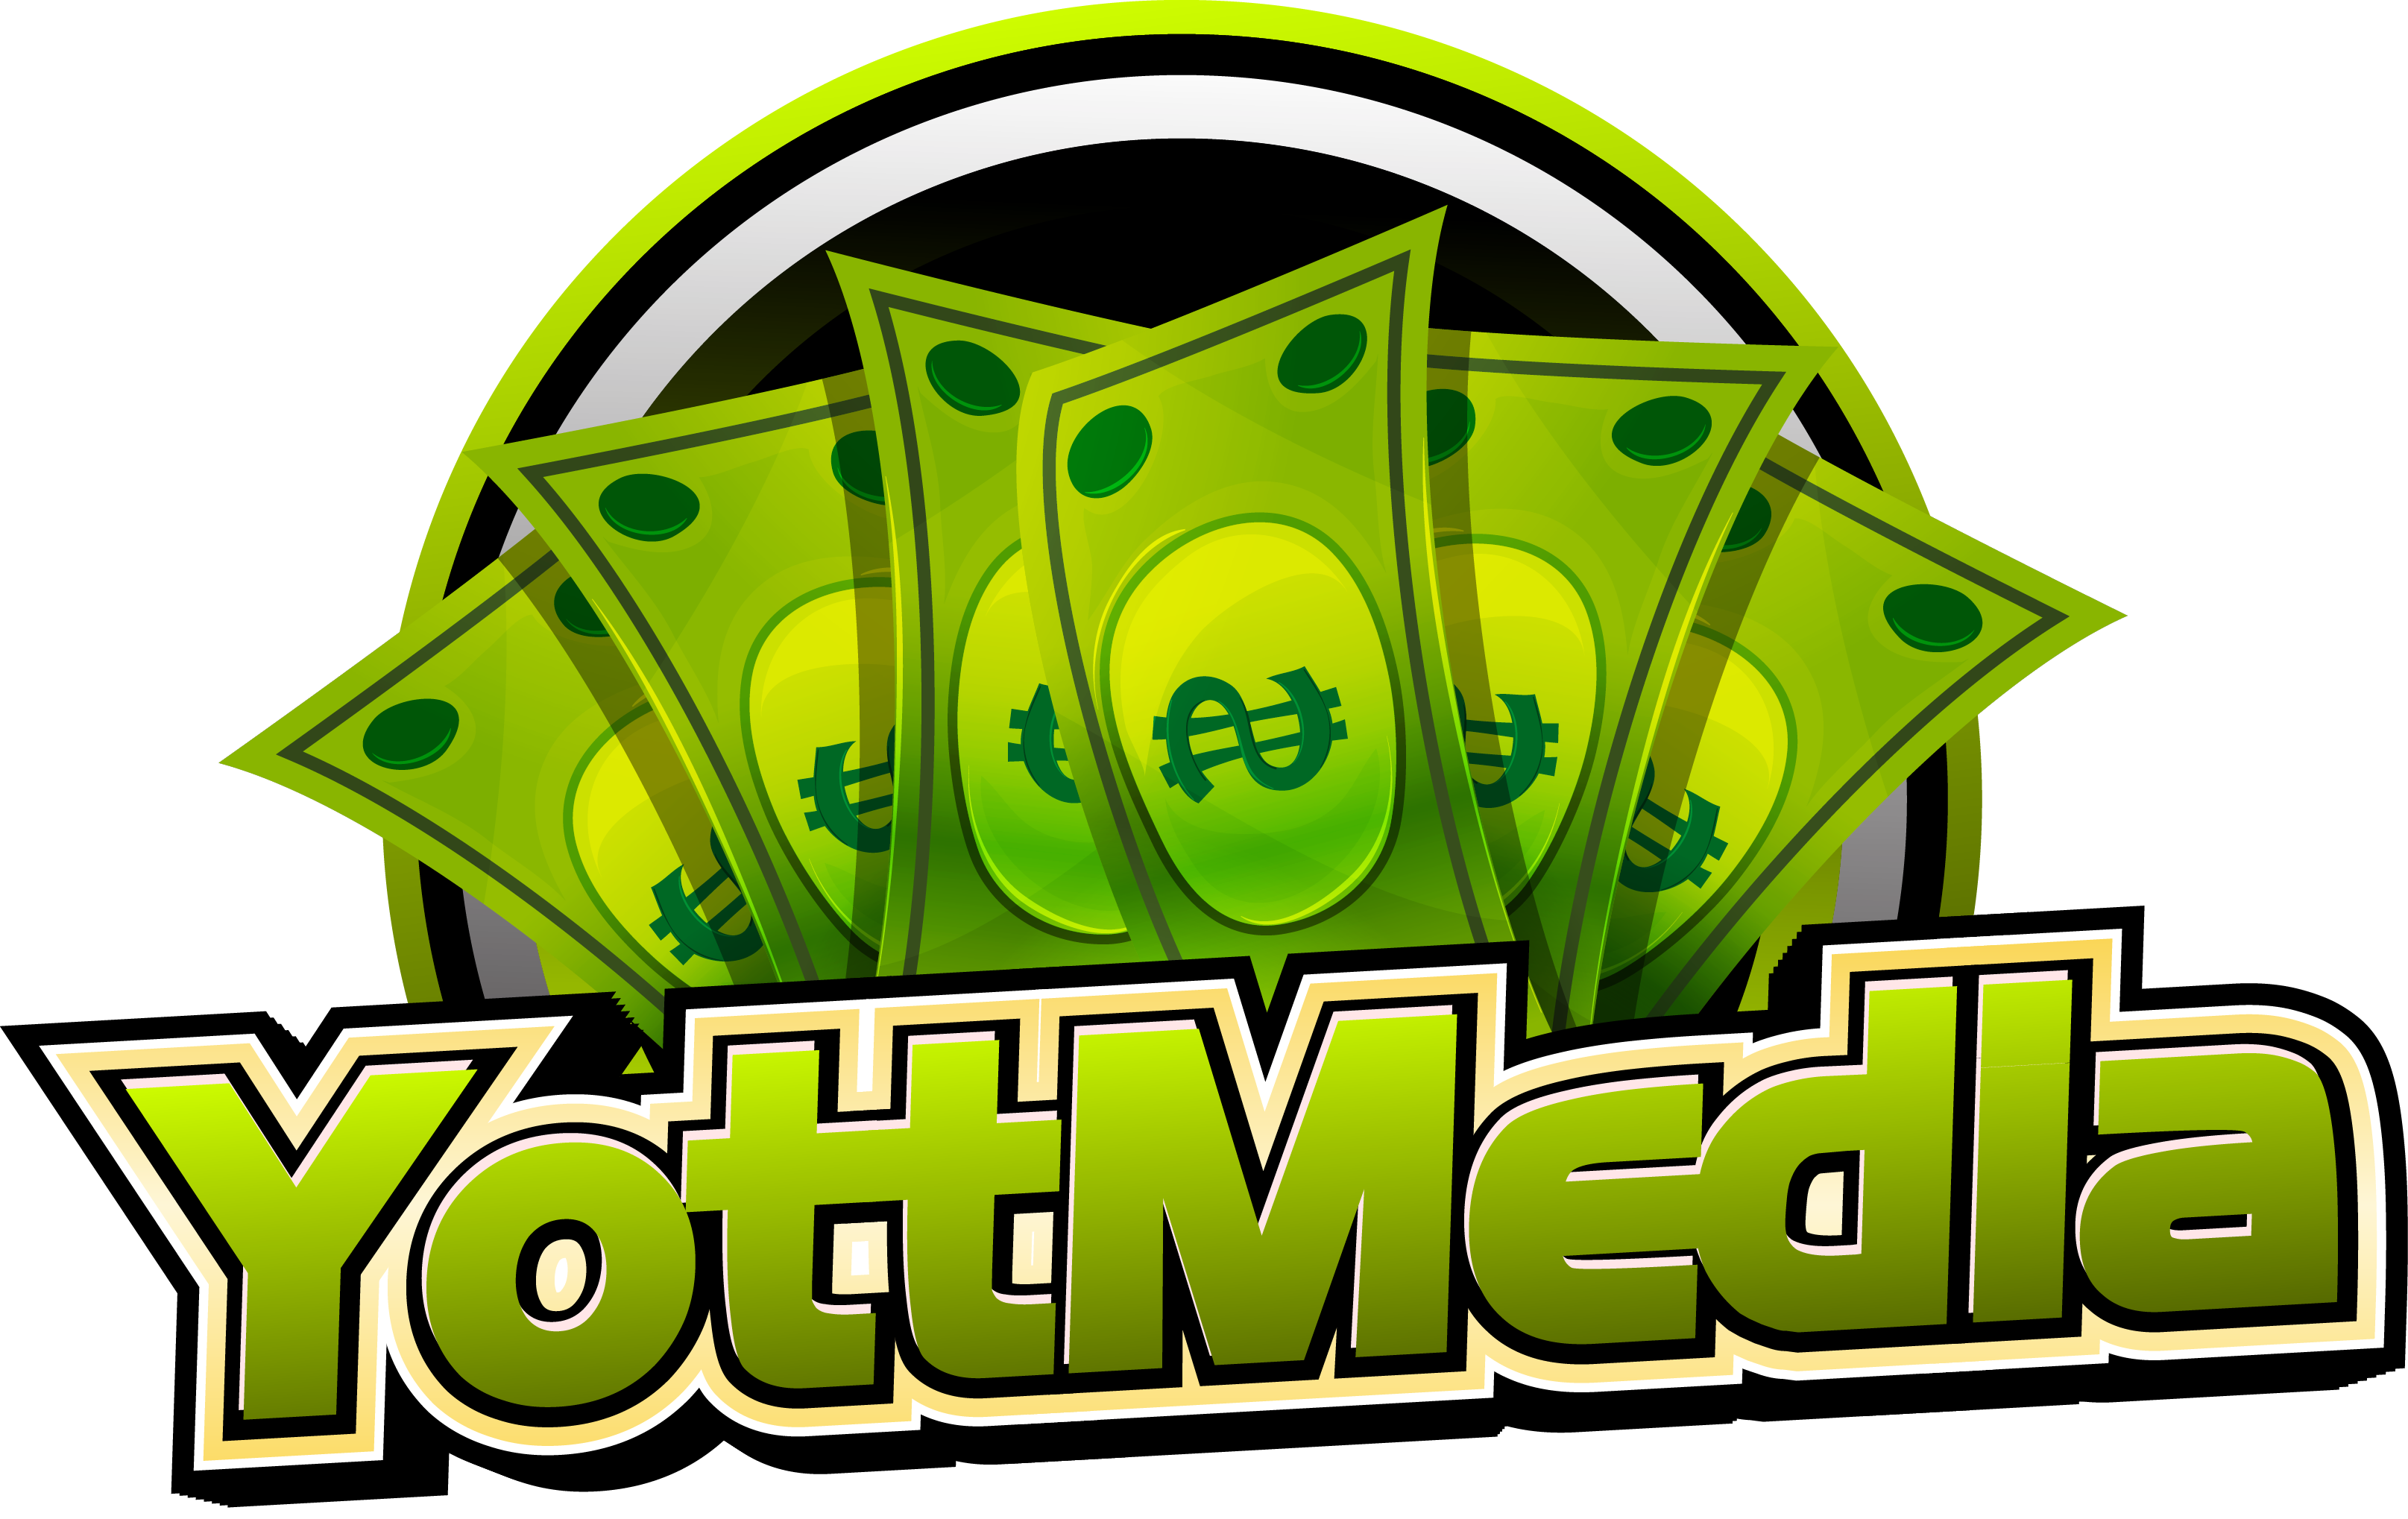 In the Yottmedia affiliate network, you can earn without leaving home. It is a comprehensive platform offering a variety of partner programs. You do not have to invest money or have any special skills. Join Yottmedia and create an account today!